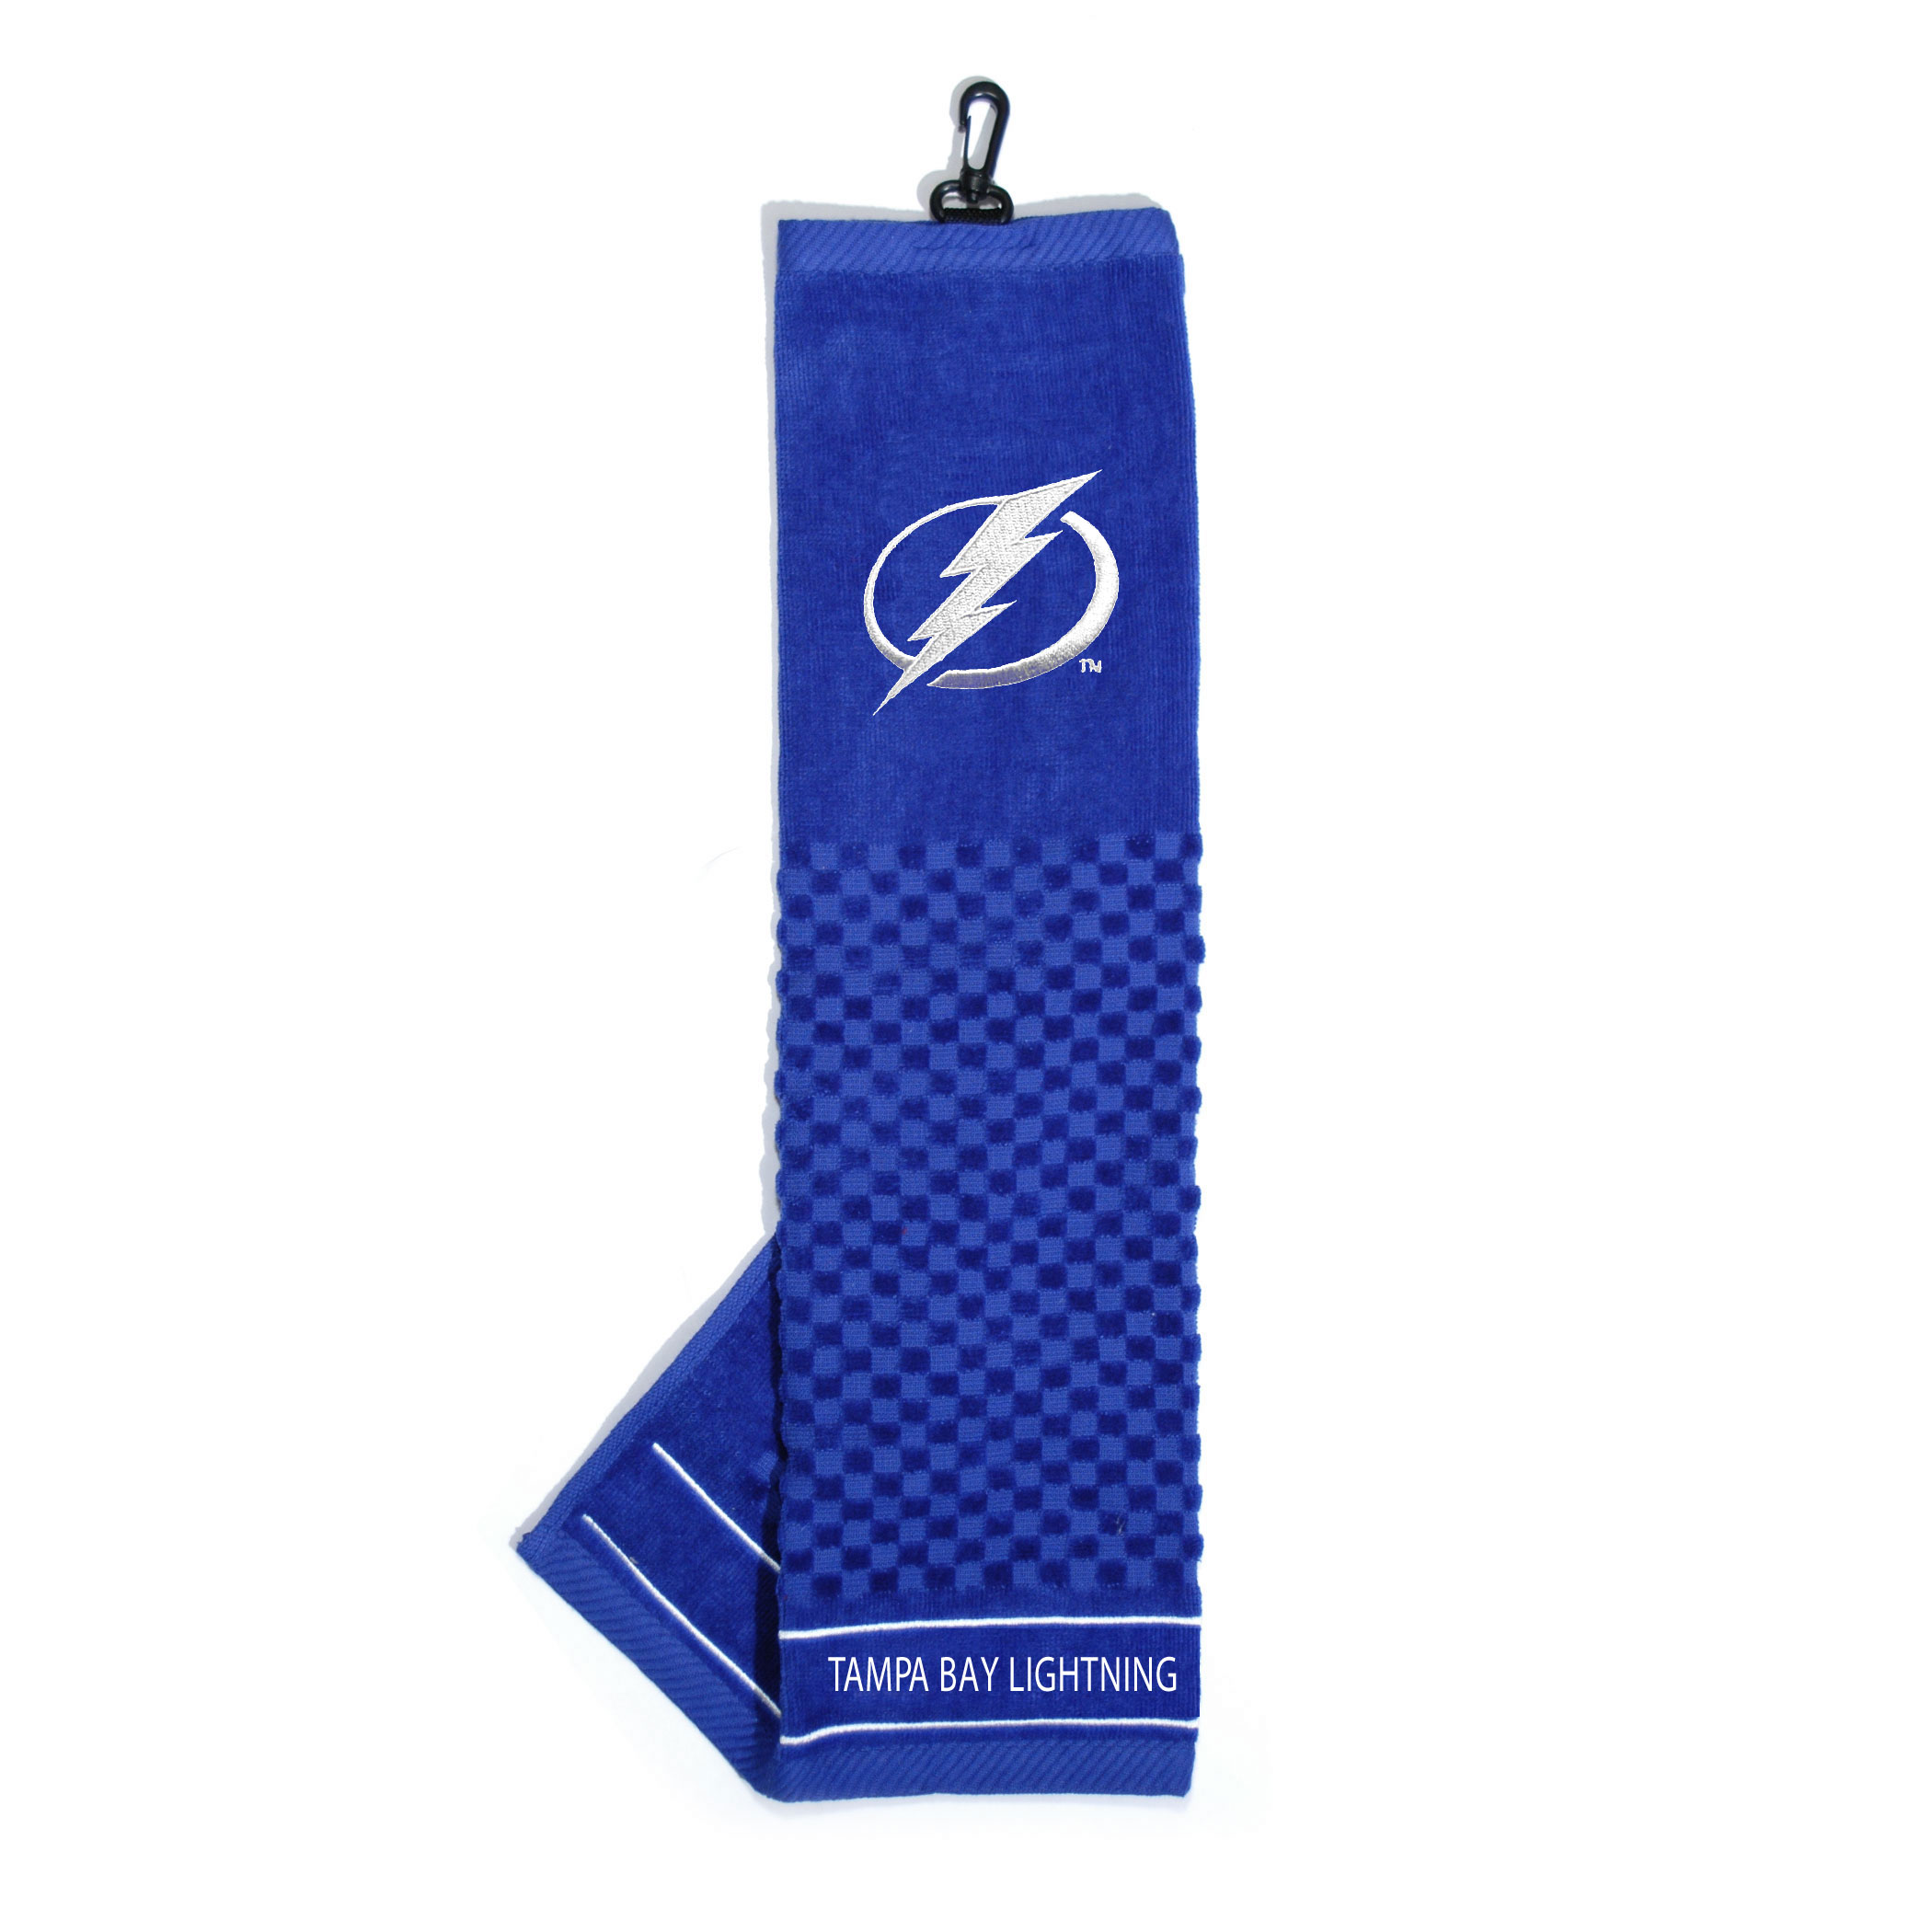 Tampa Bay Lightning Embroidered Towel